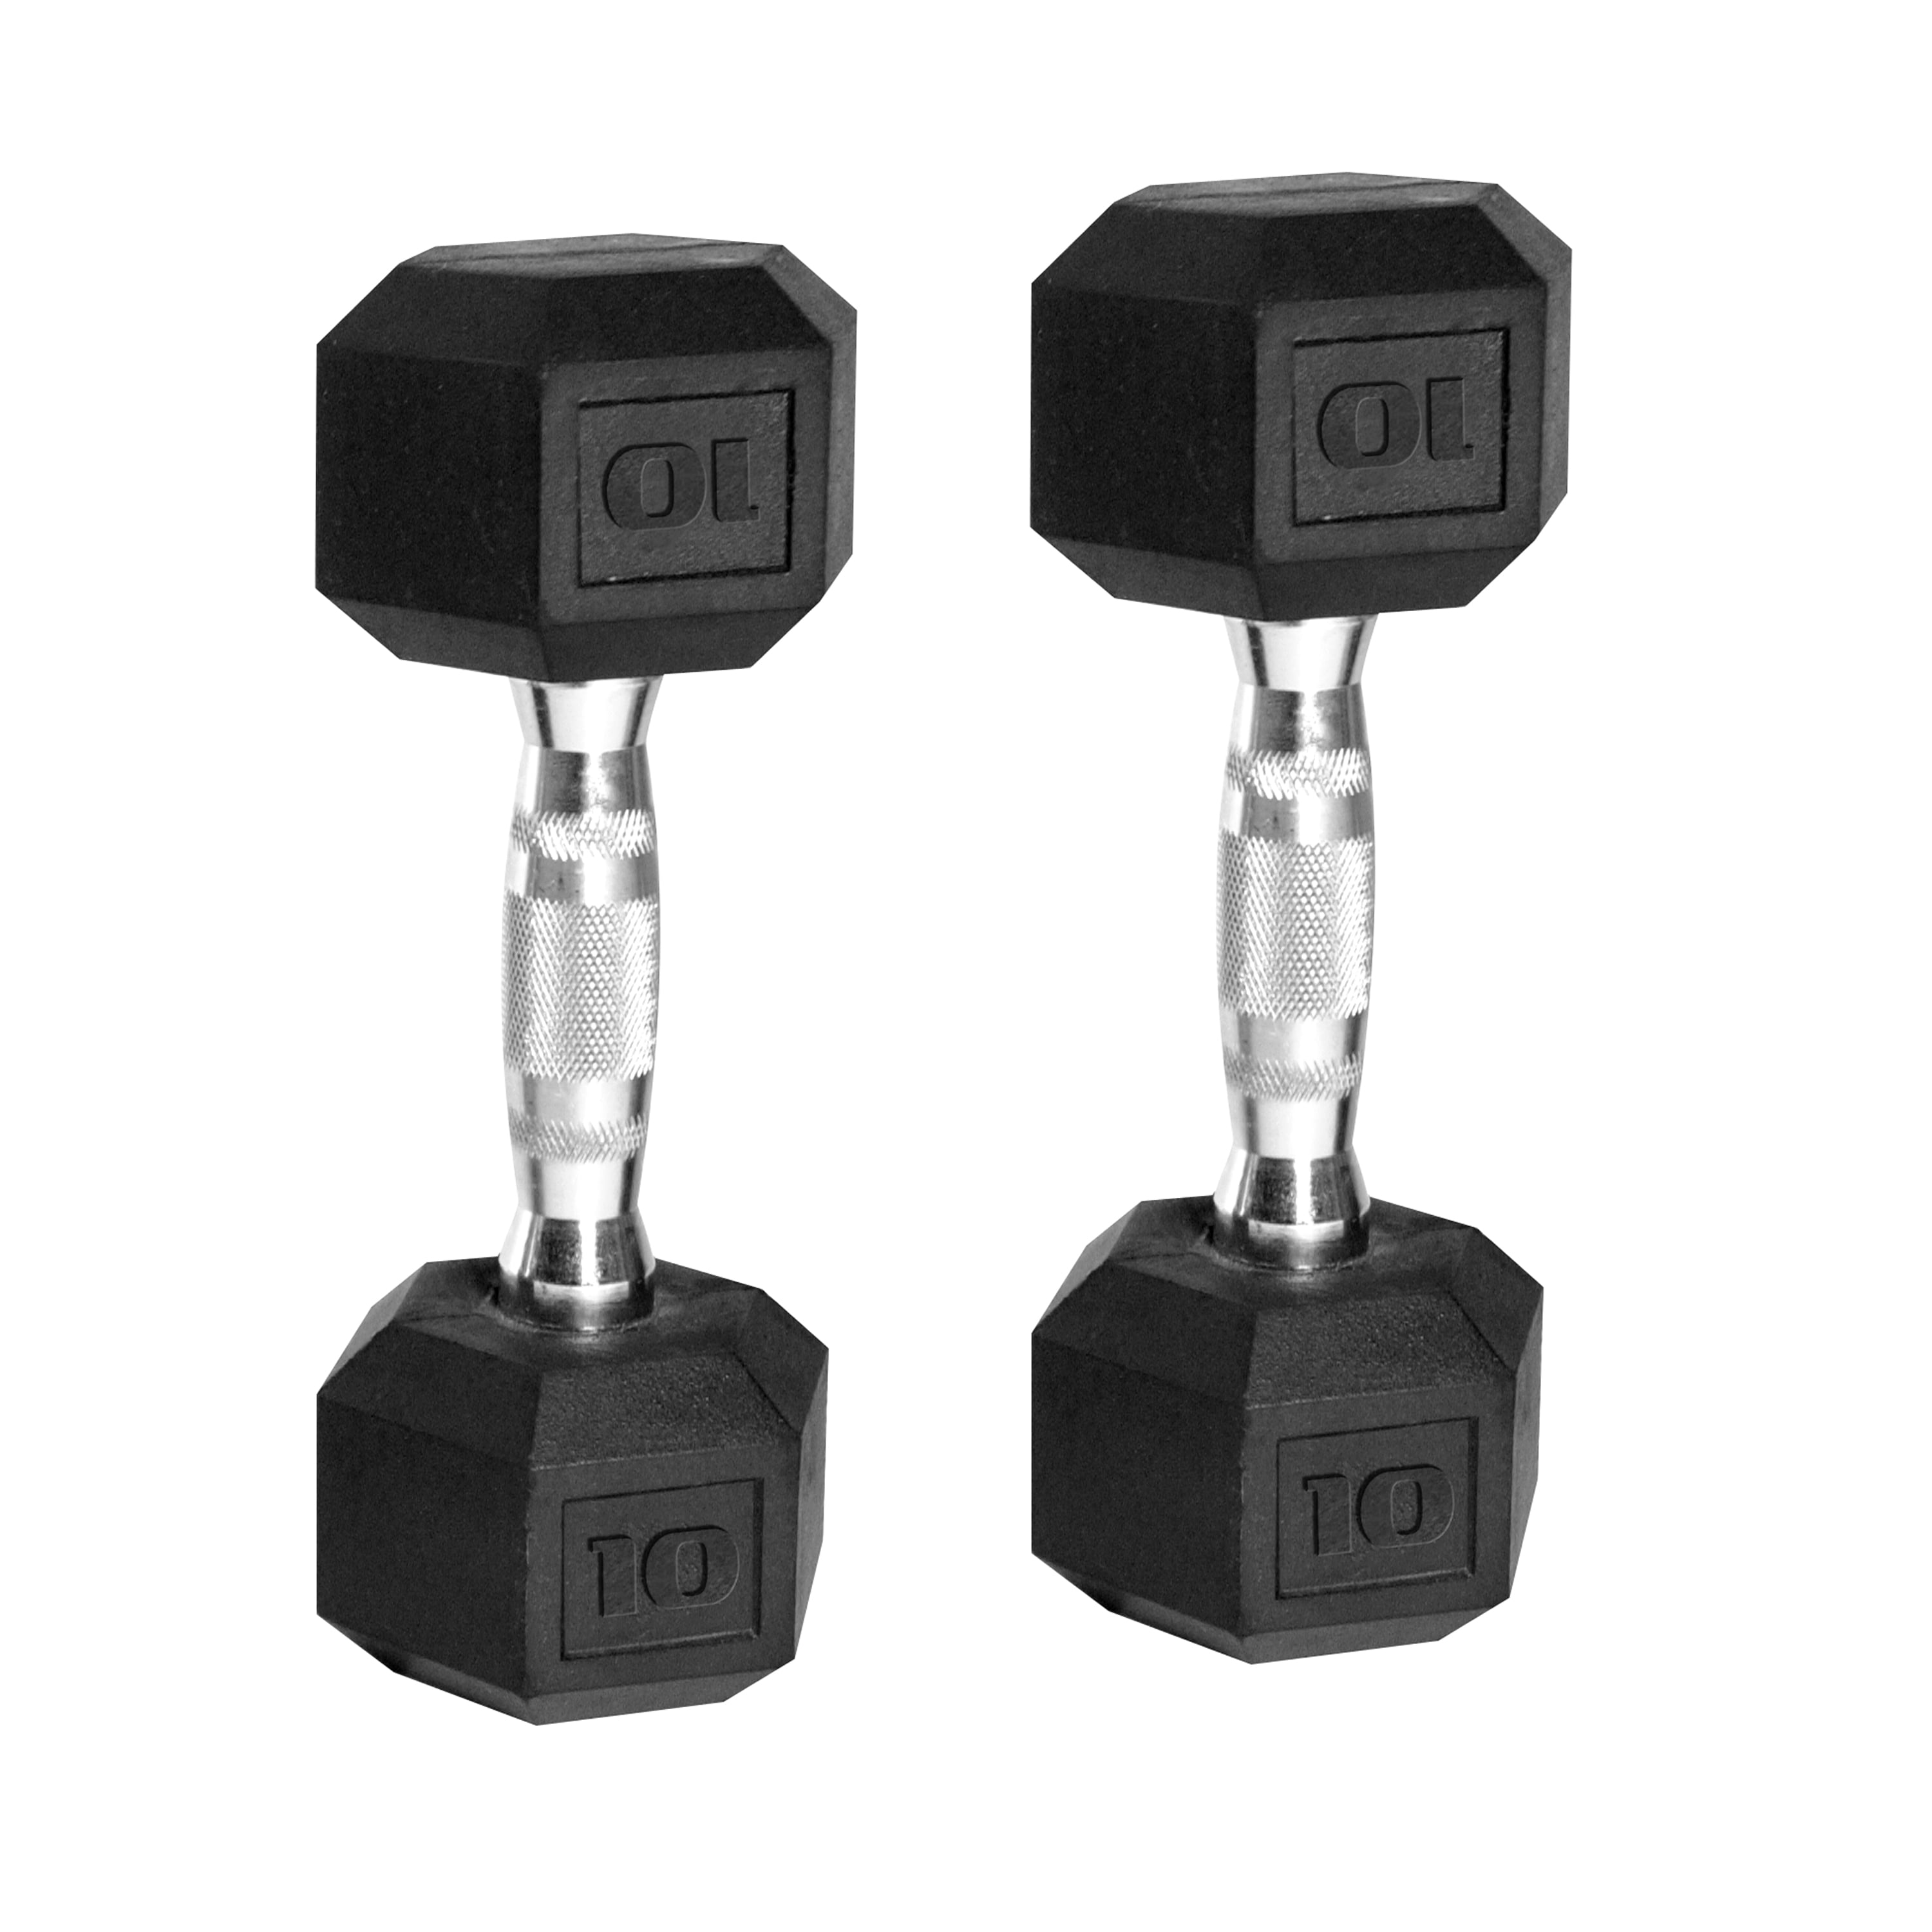 CAP Barbell Dumbbells Cast Iron PAIR Hex Weight Fitness Gym Home Workout Set 2 